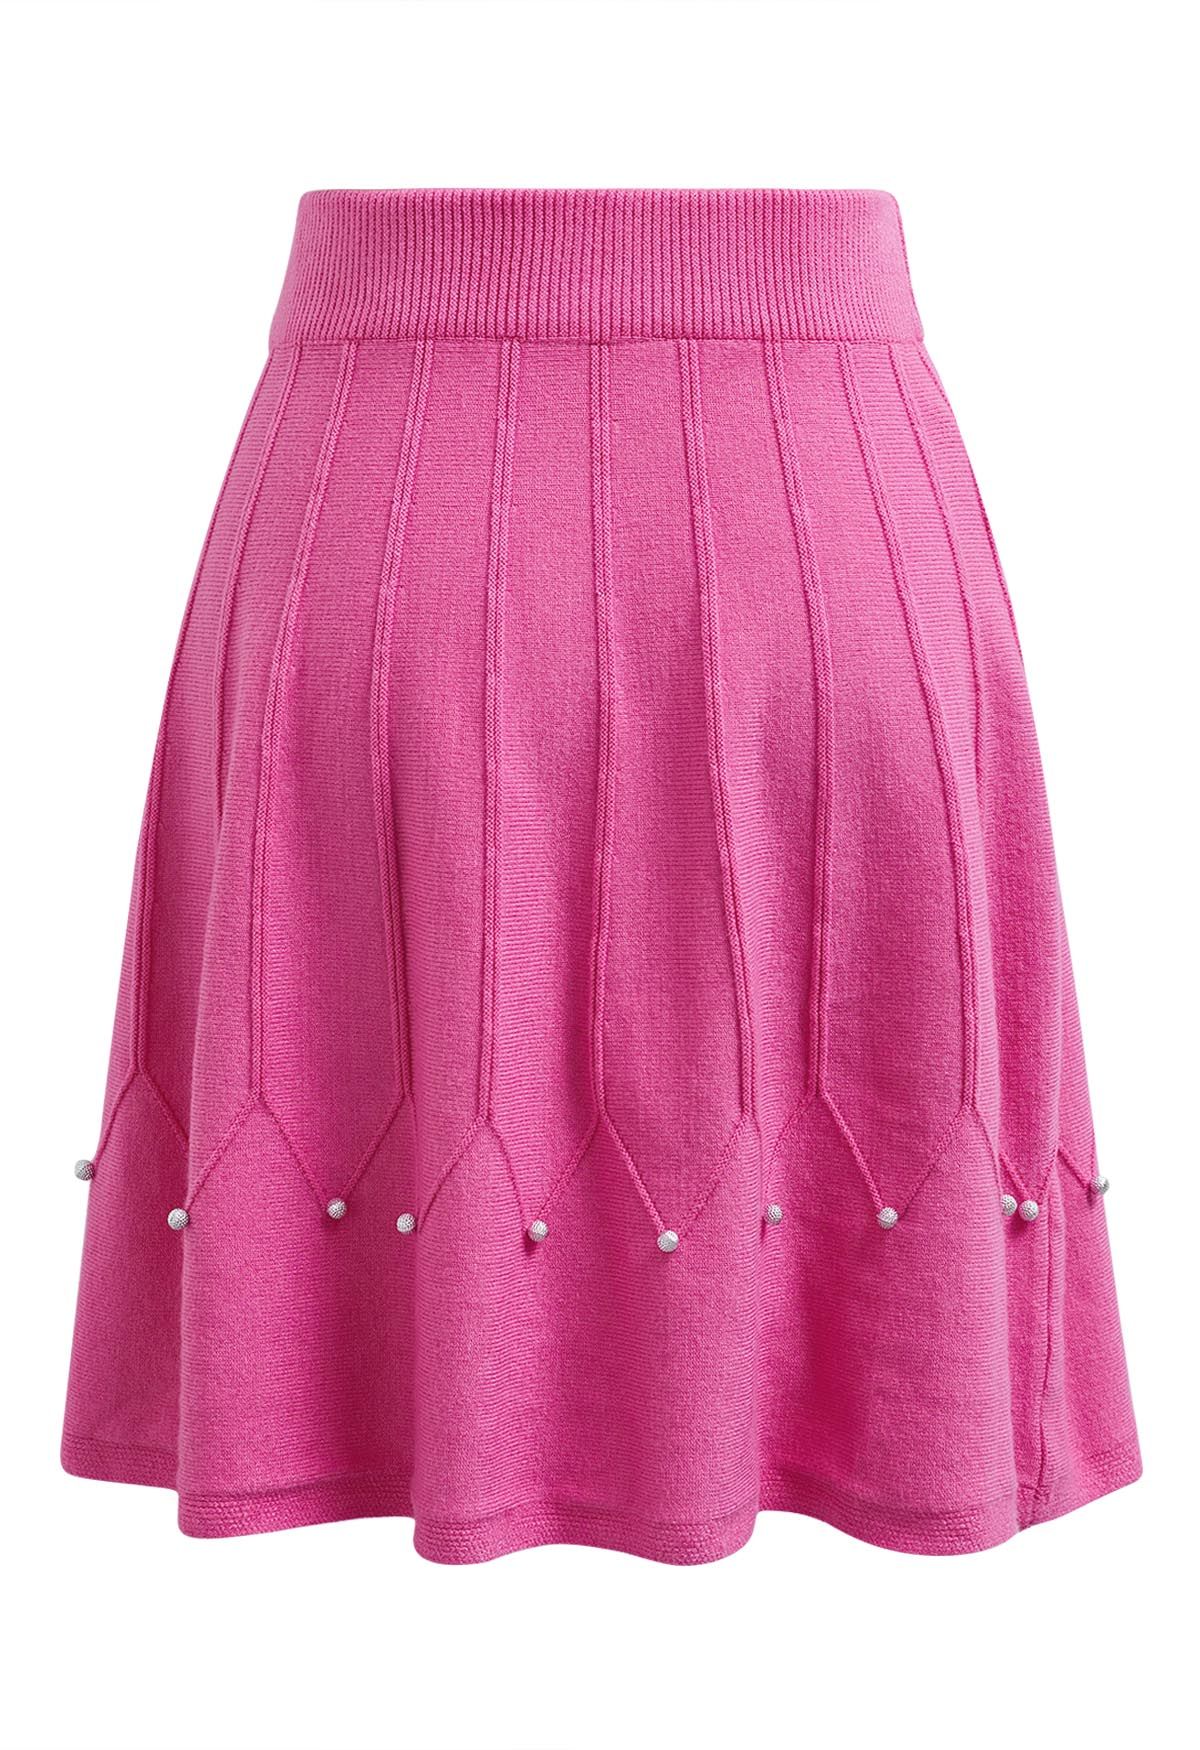 Silver Bead Embellished Seam Knit Skirt in Magenta - Retro, Indie and ...